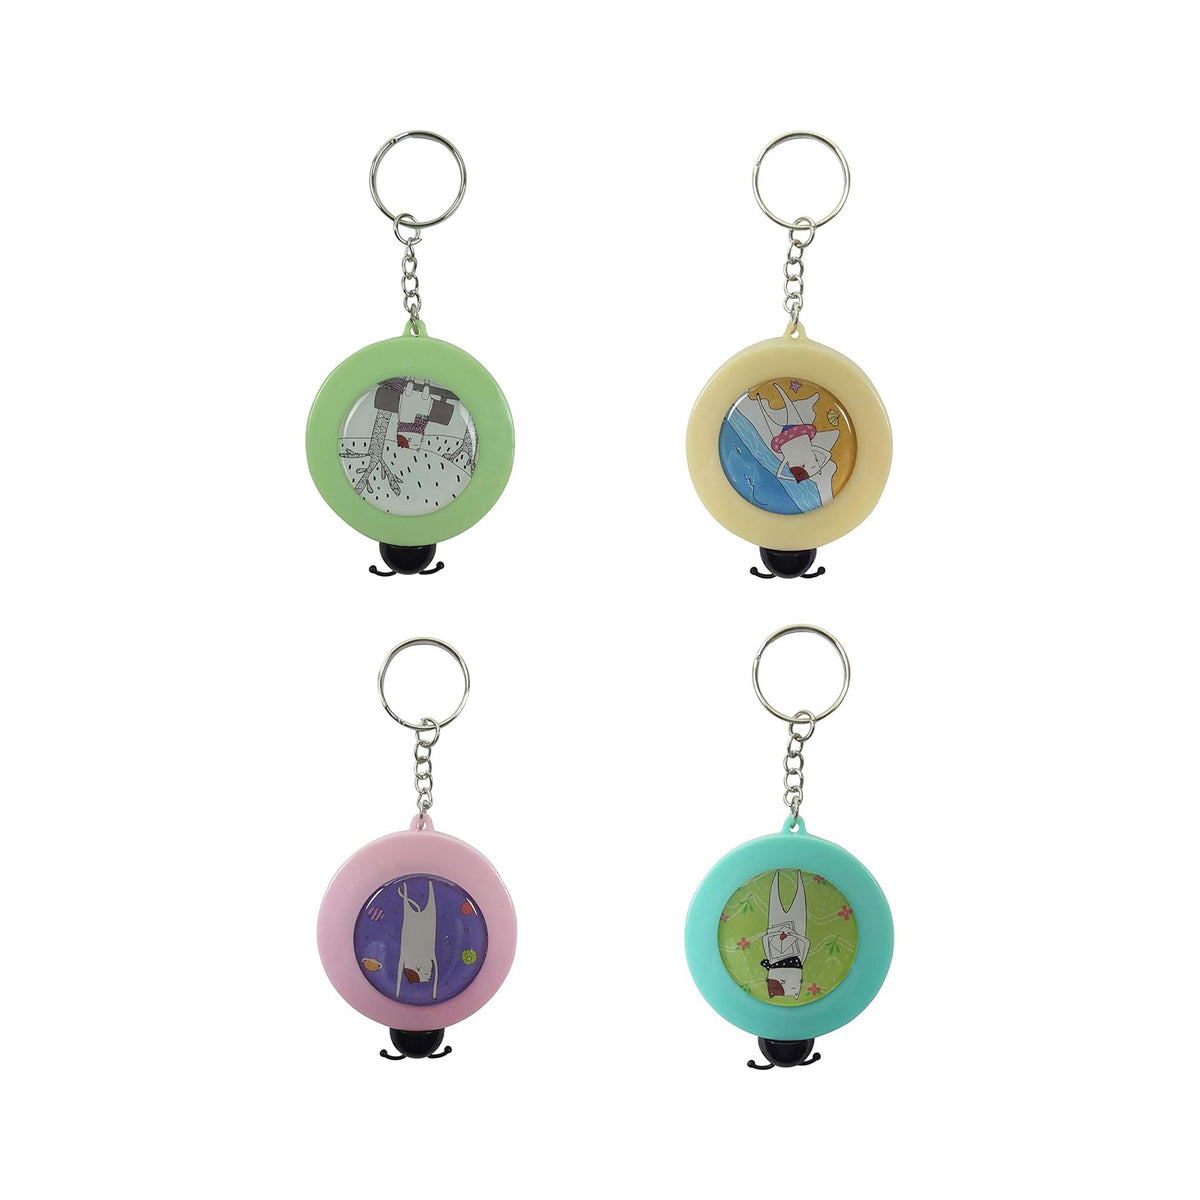 Cute Keychain Tape Measure Set - Portable and Fun Measuring Tool (Set of 4)